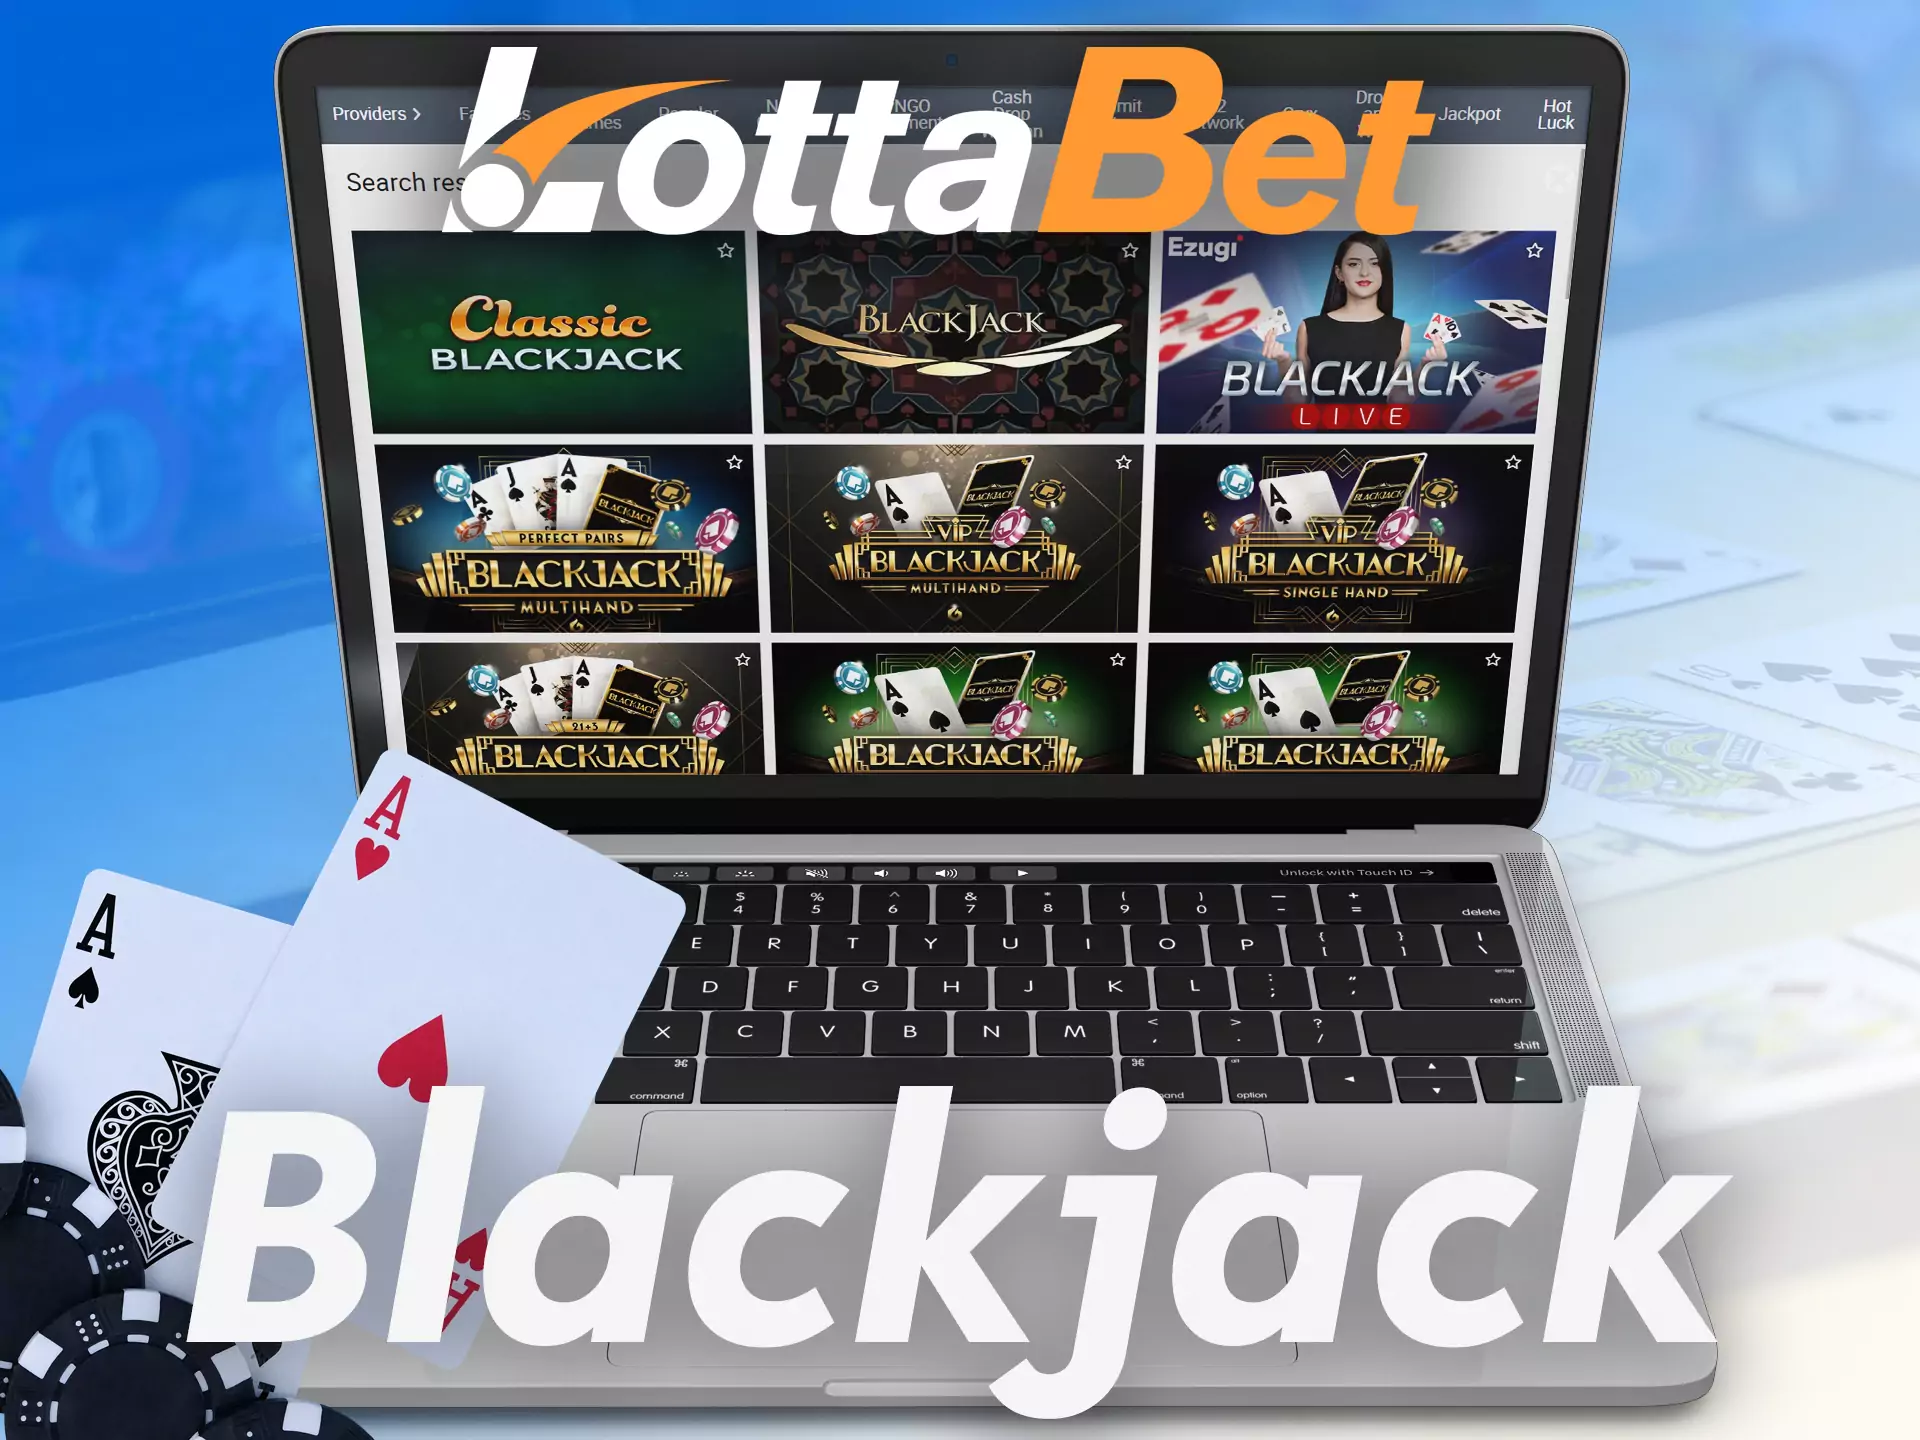 Among the card games of Lottabet, there is also blackjack.